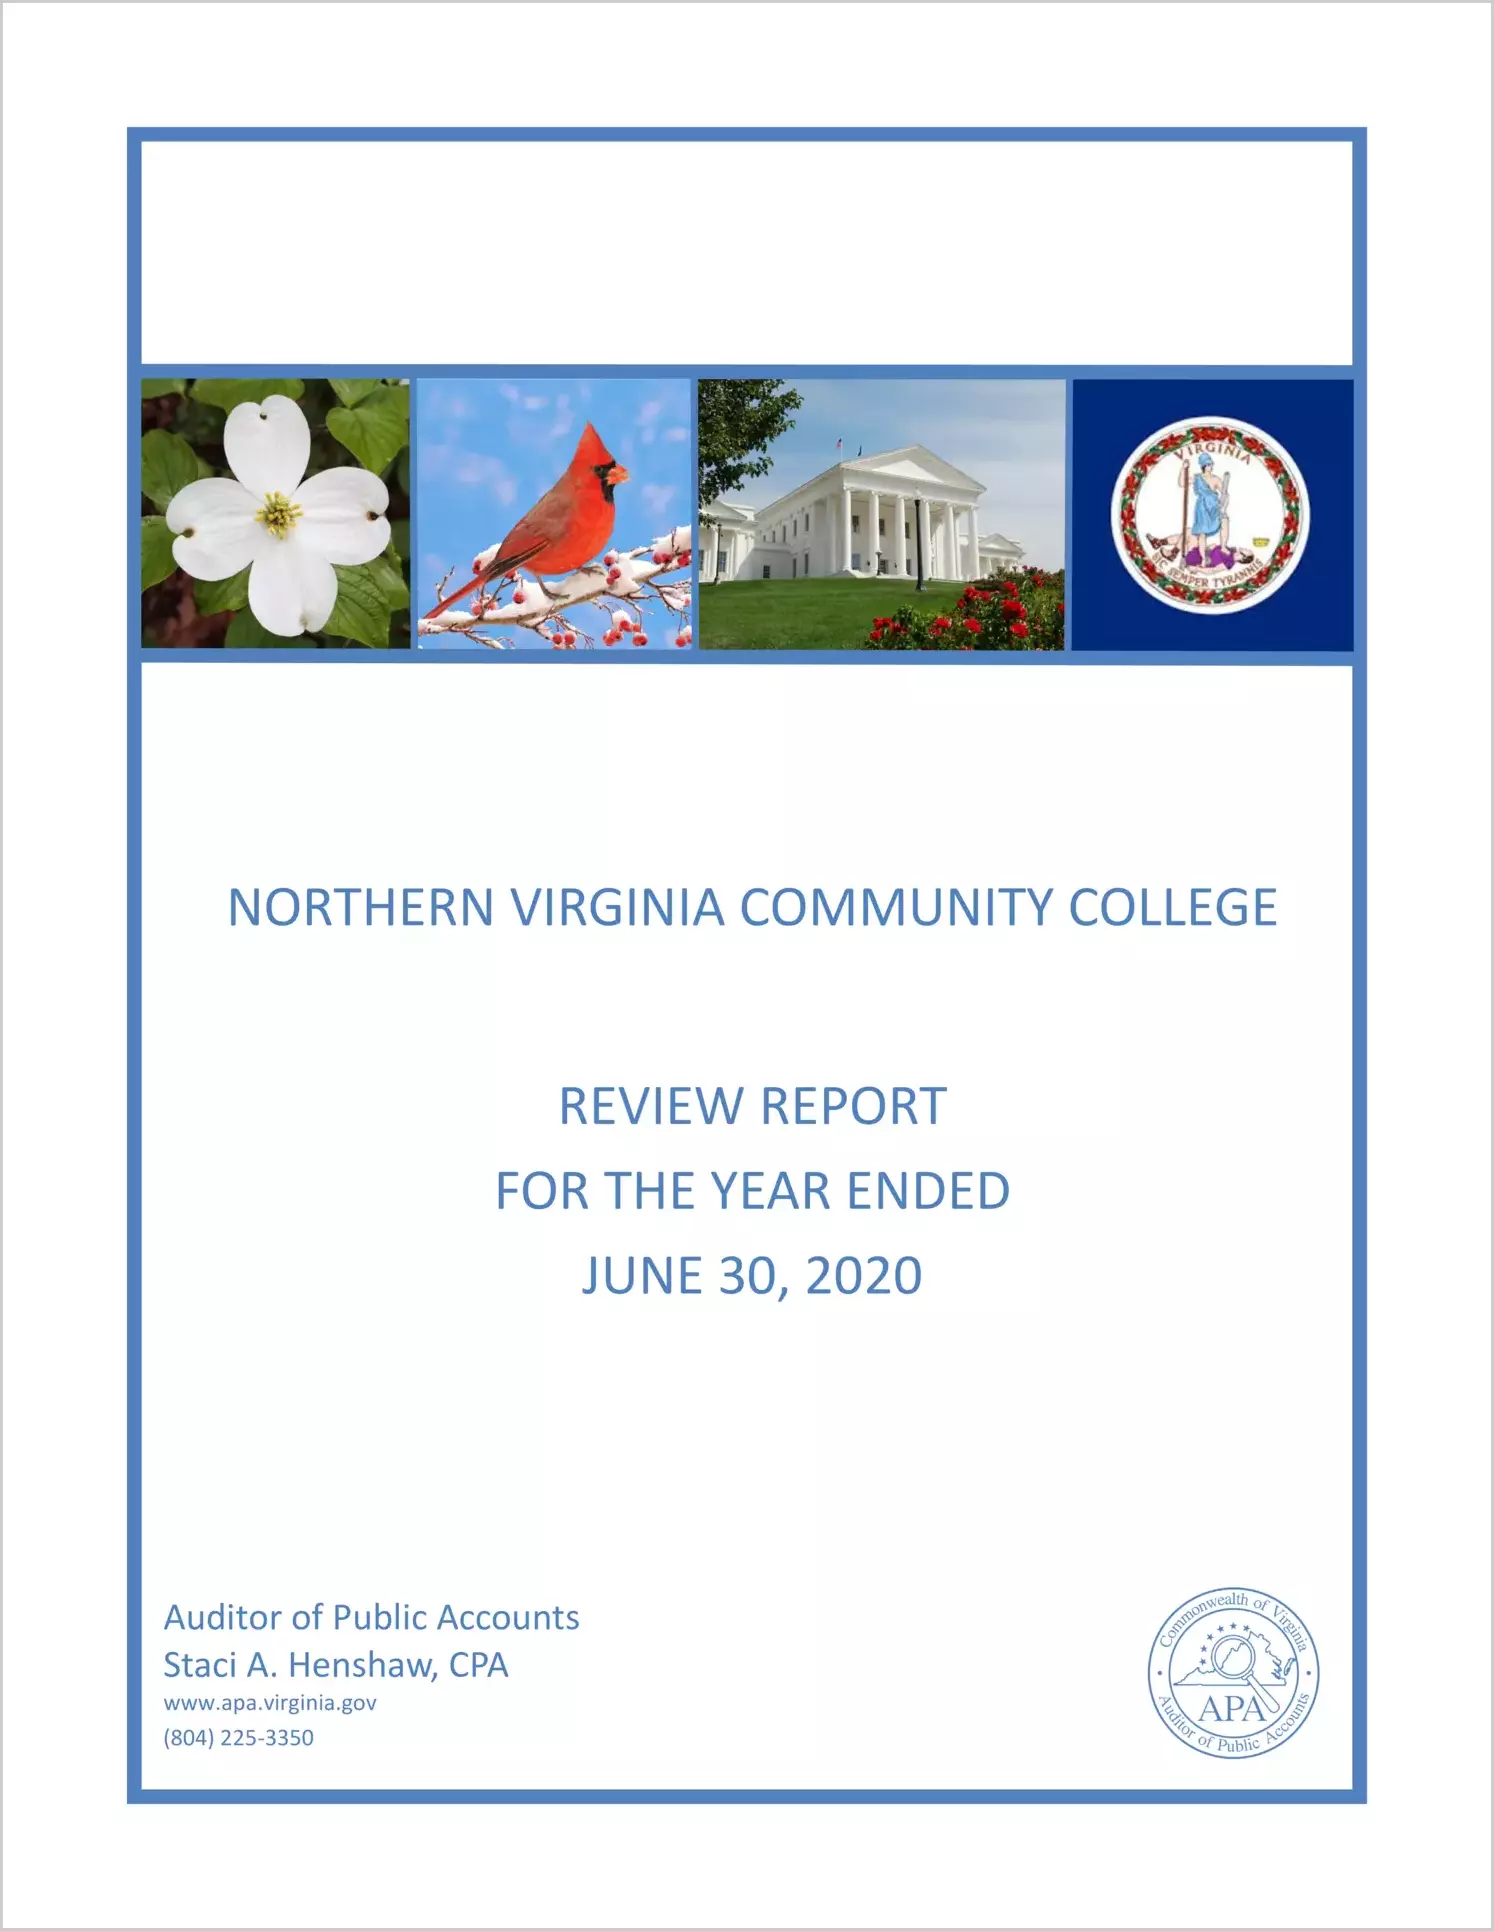 Northern Virginia Community College Review Report for the year ended June 30, 2020